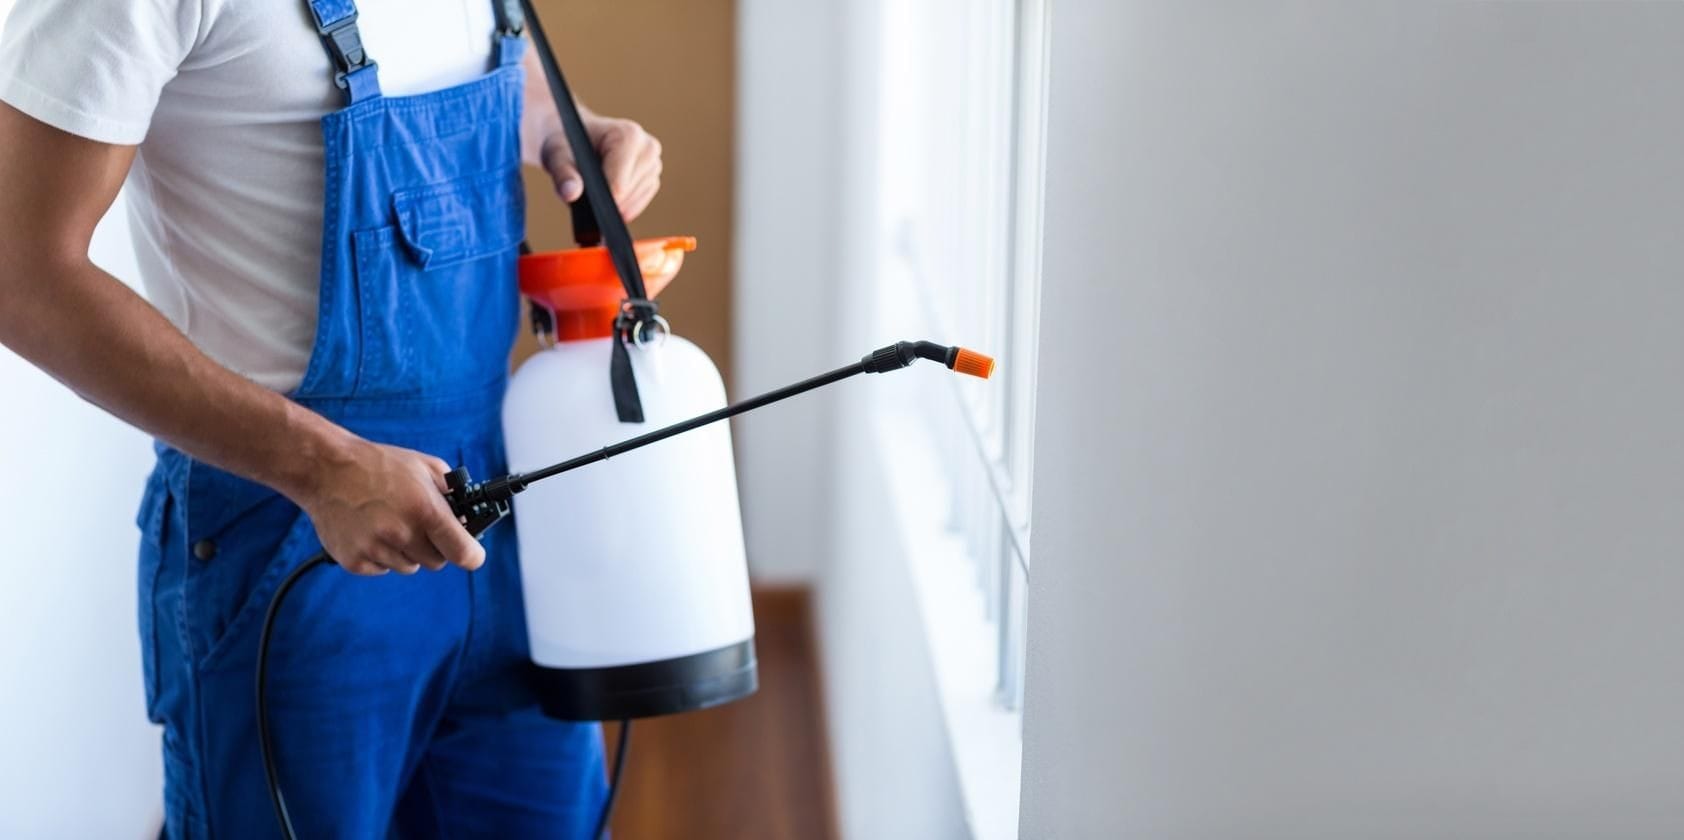 7 Top Pest Control Services of 2021 - MYMOVE